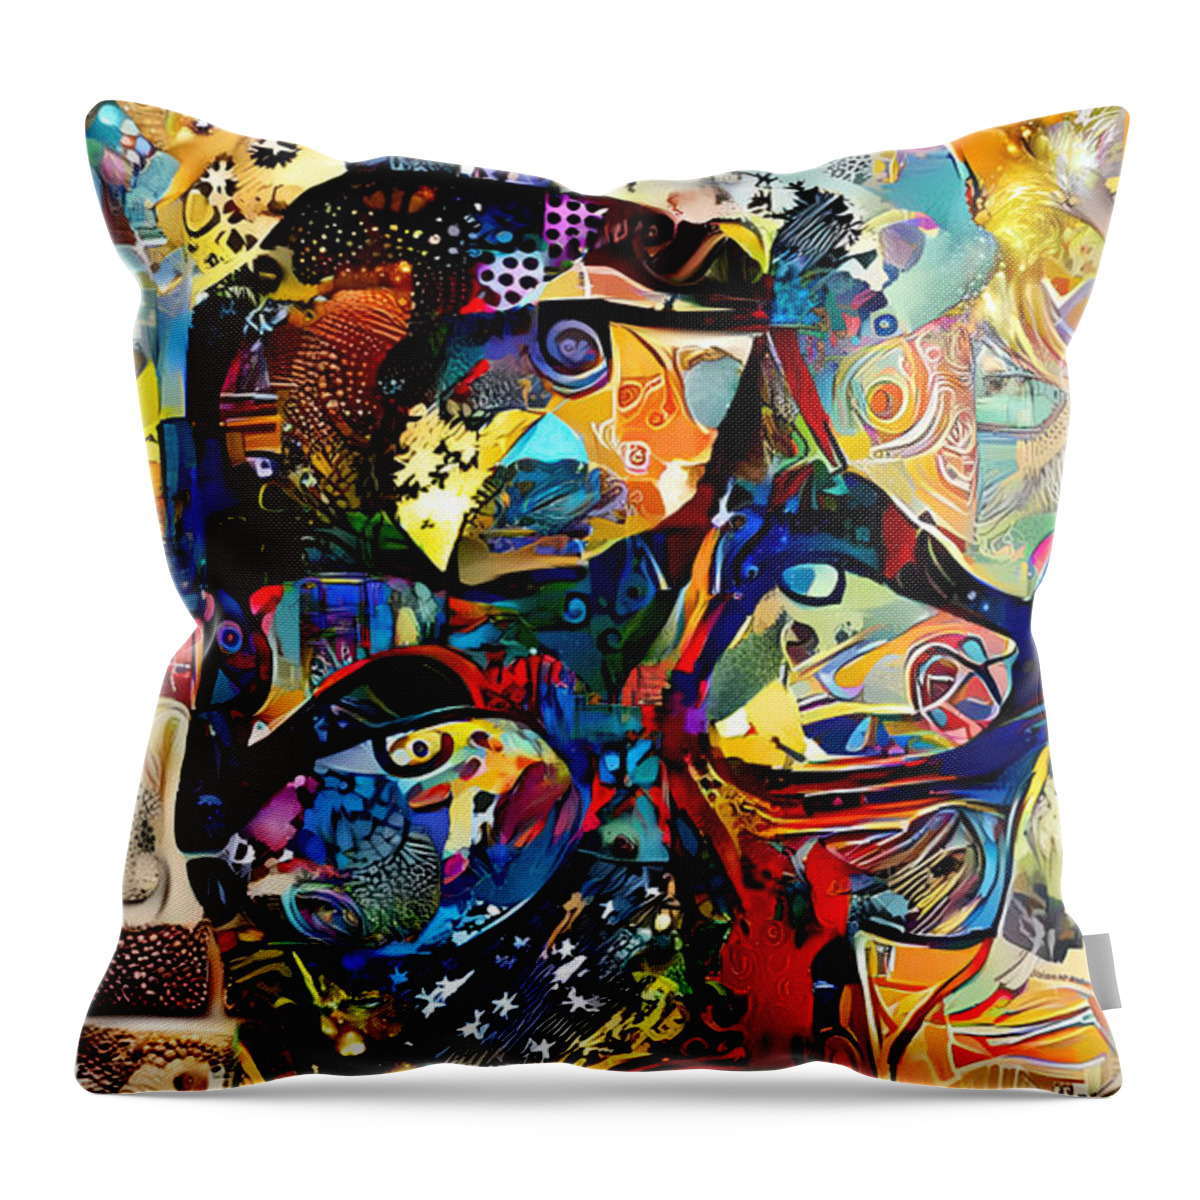 Contemporary Art Throw Pillow featuring the digital art 53 by Jeremiah Ray